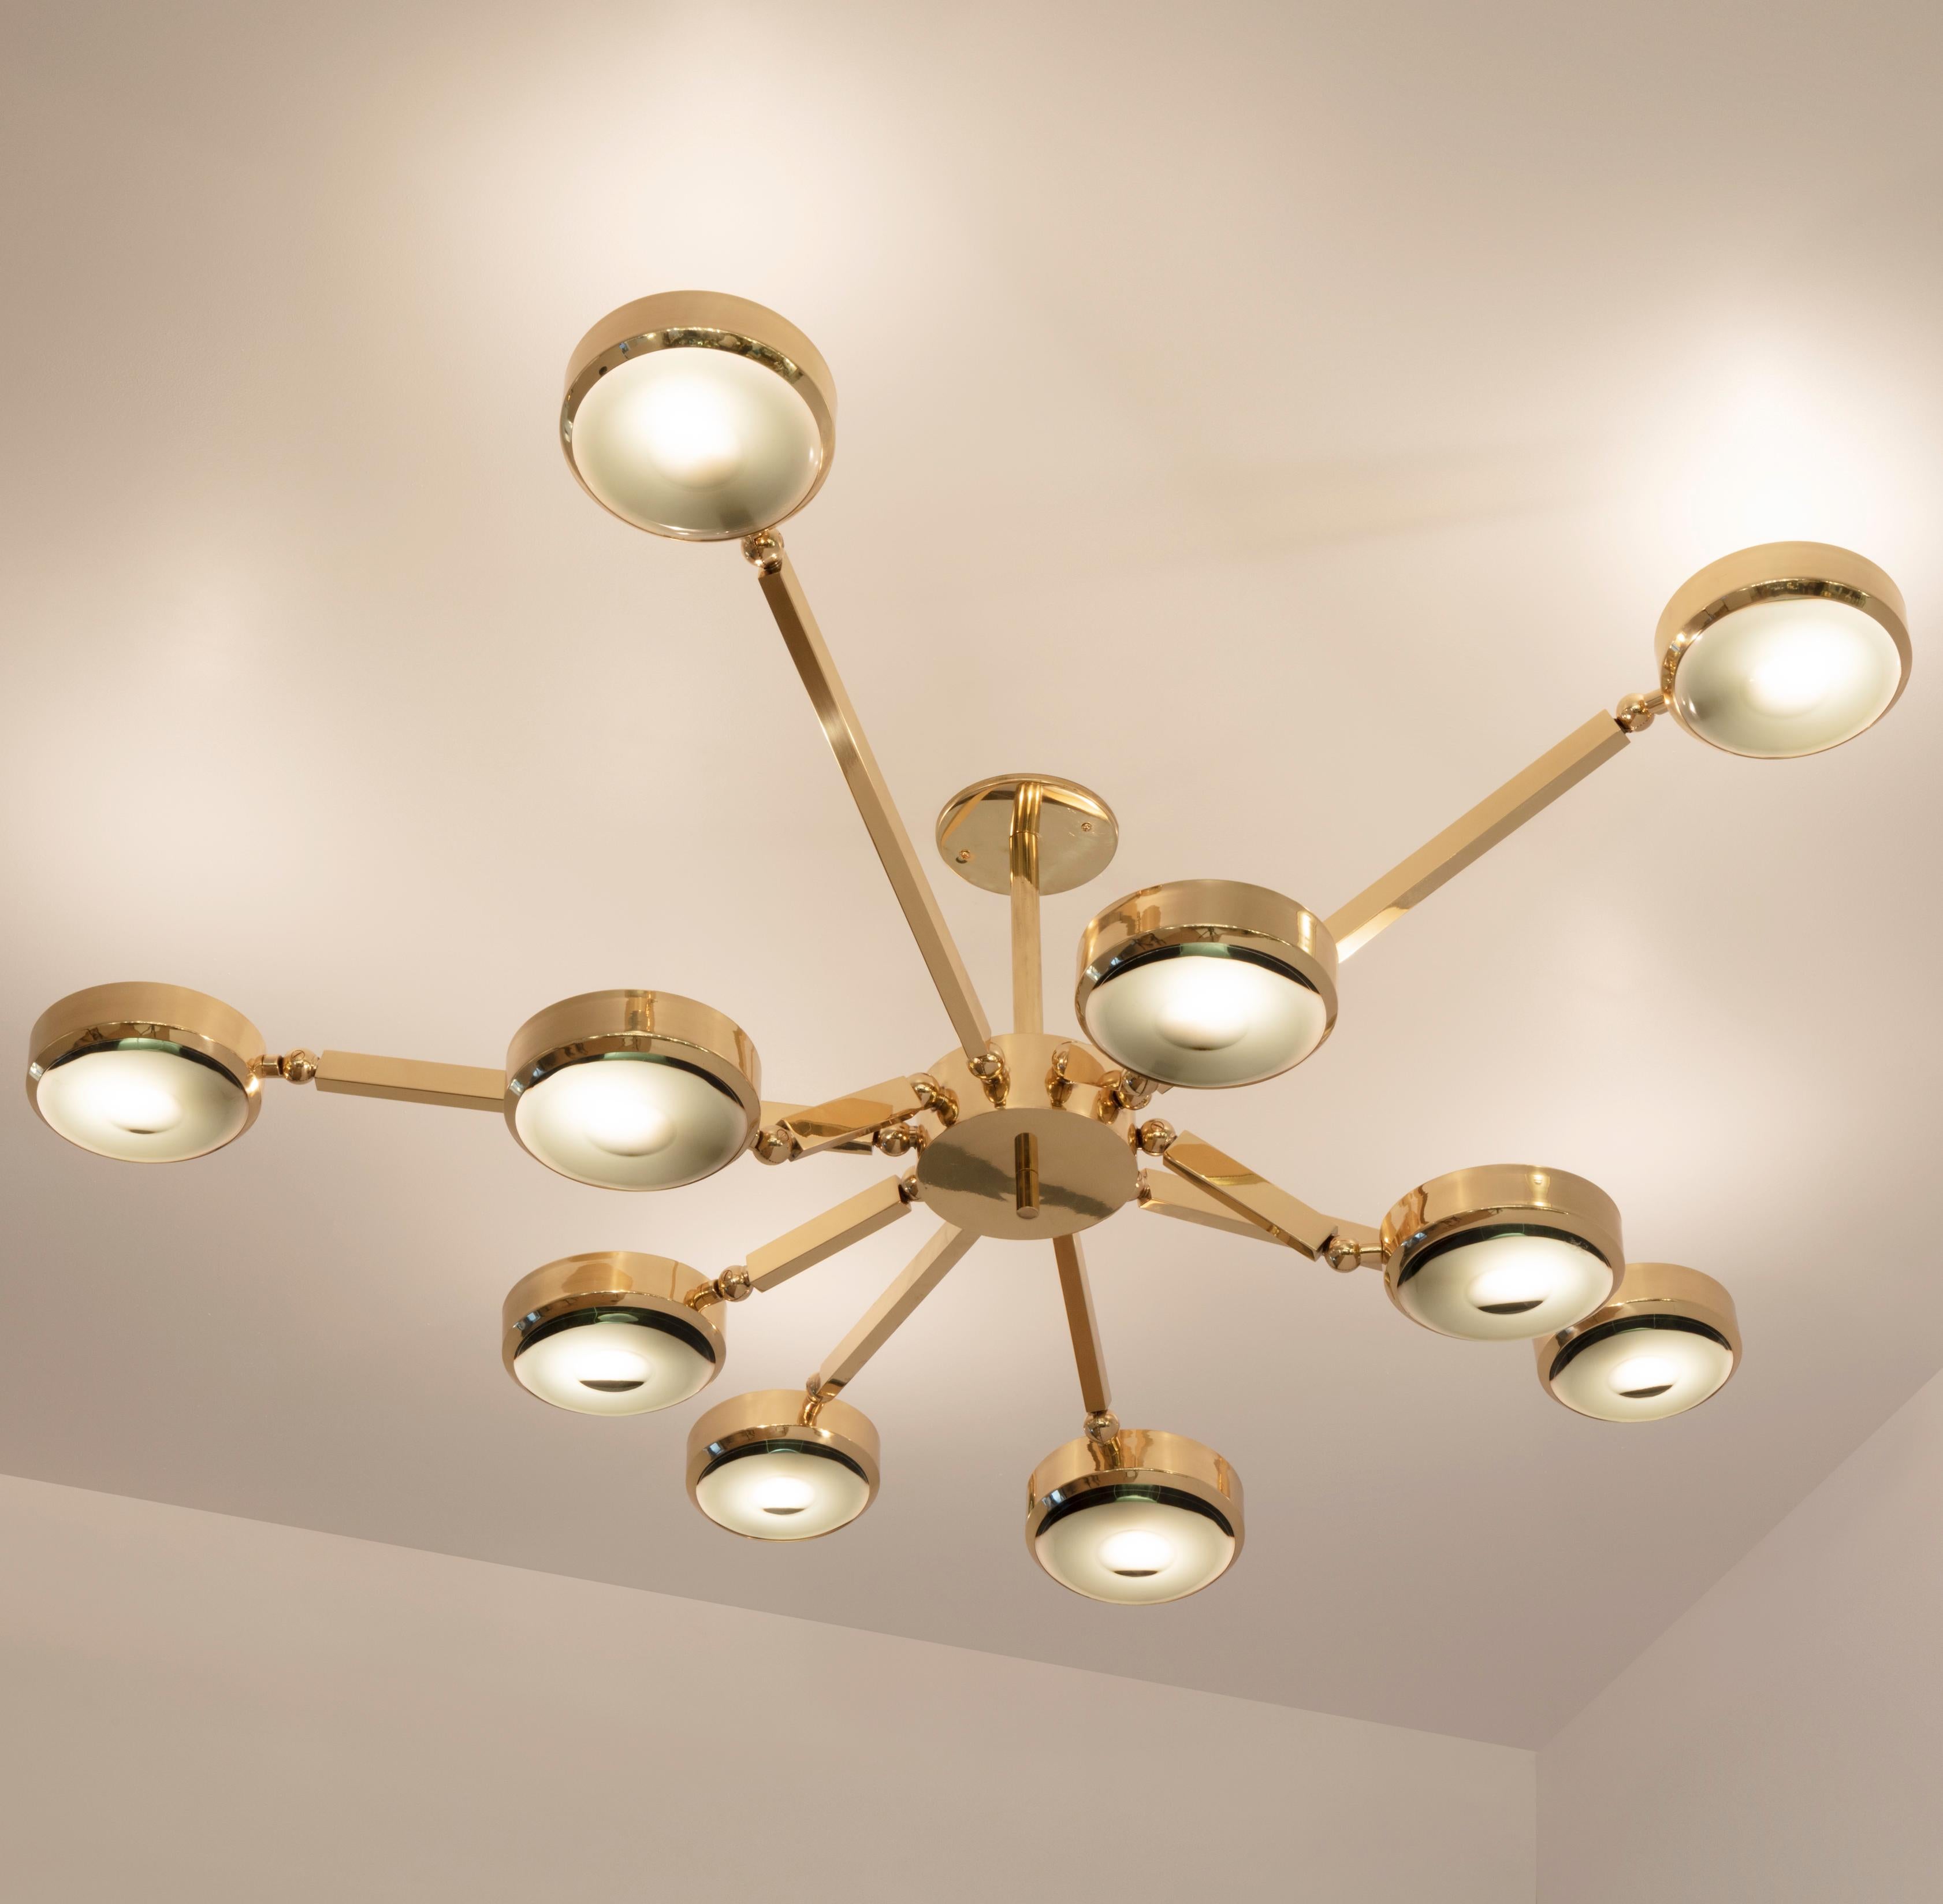 Brass Oculus Articulating Ceiling Light-Polished Nickel Finish and Carved Glass For Sale